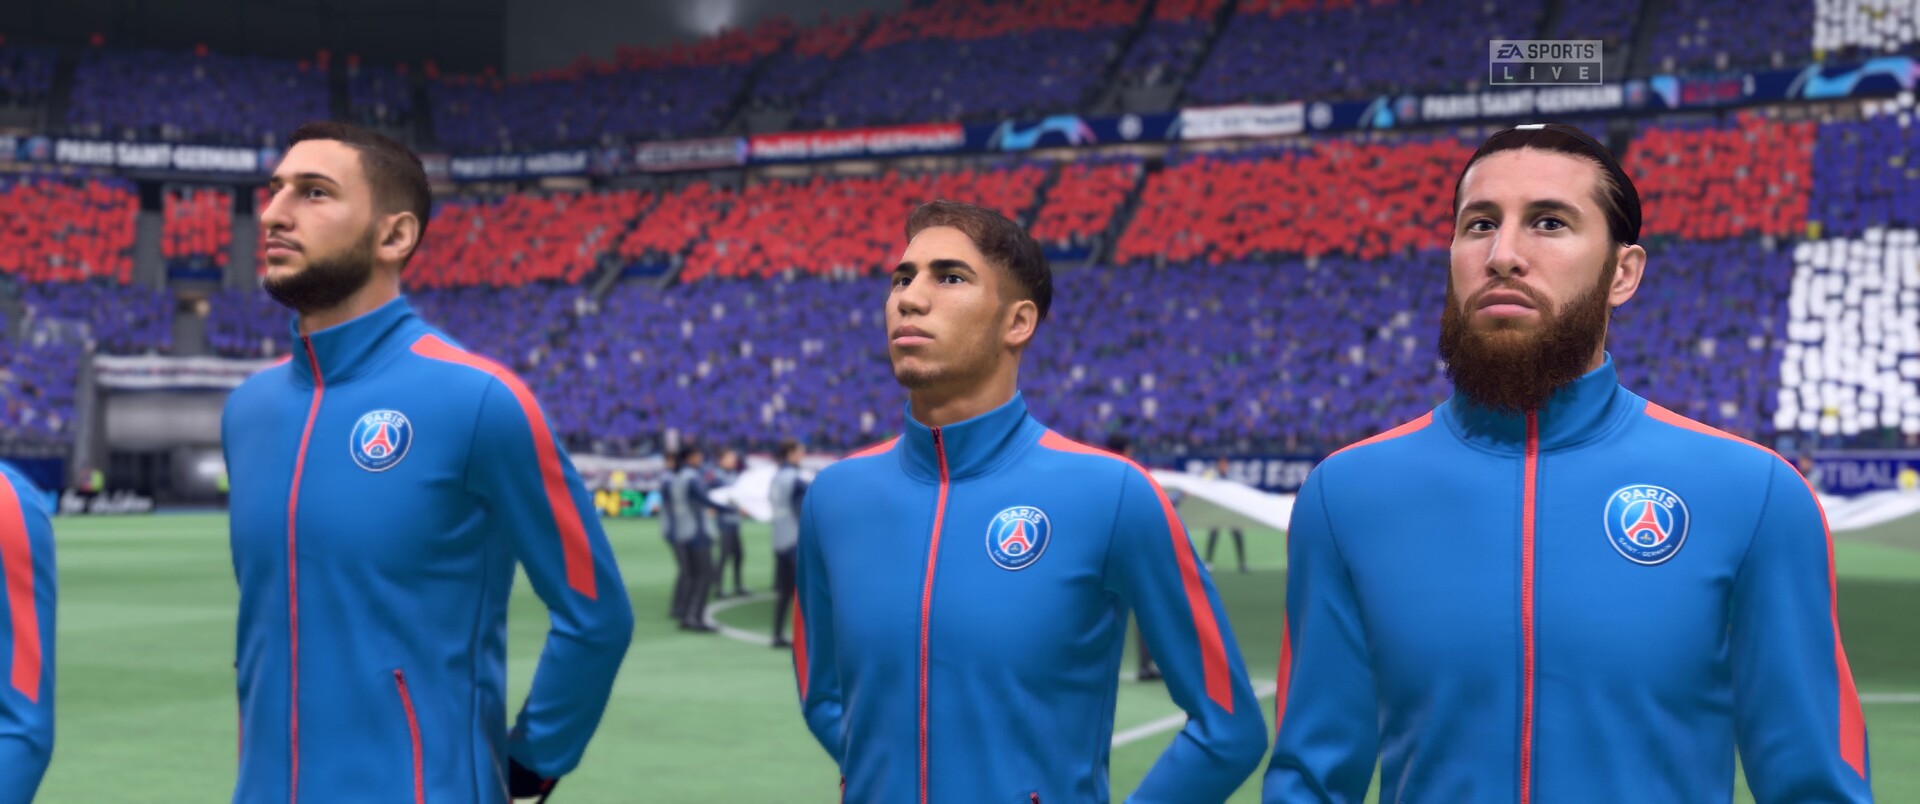 FIFA 22 in test: Notebook and desktop benchmarks -  Reviews